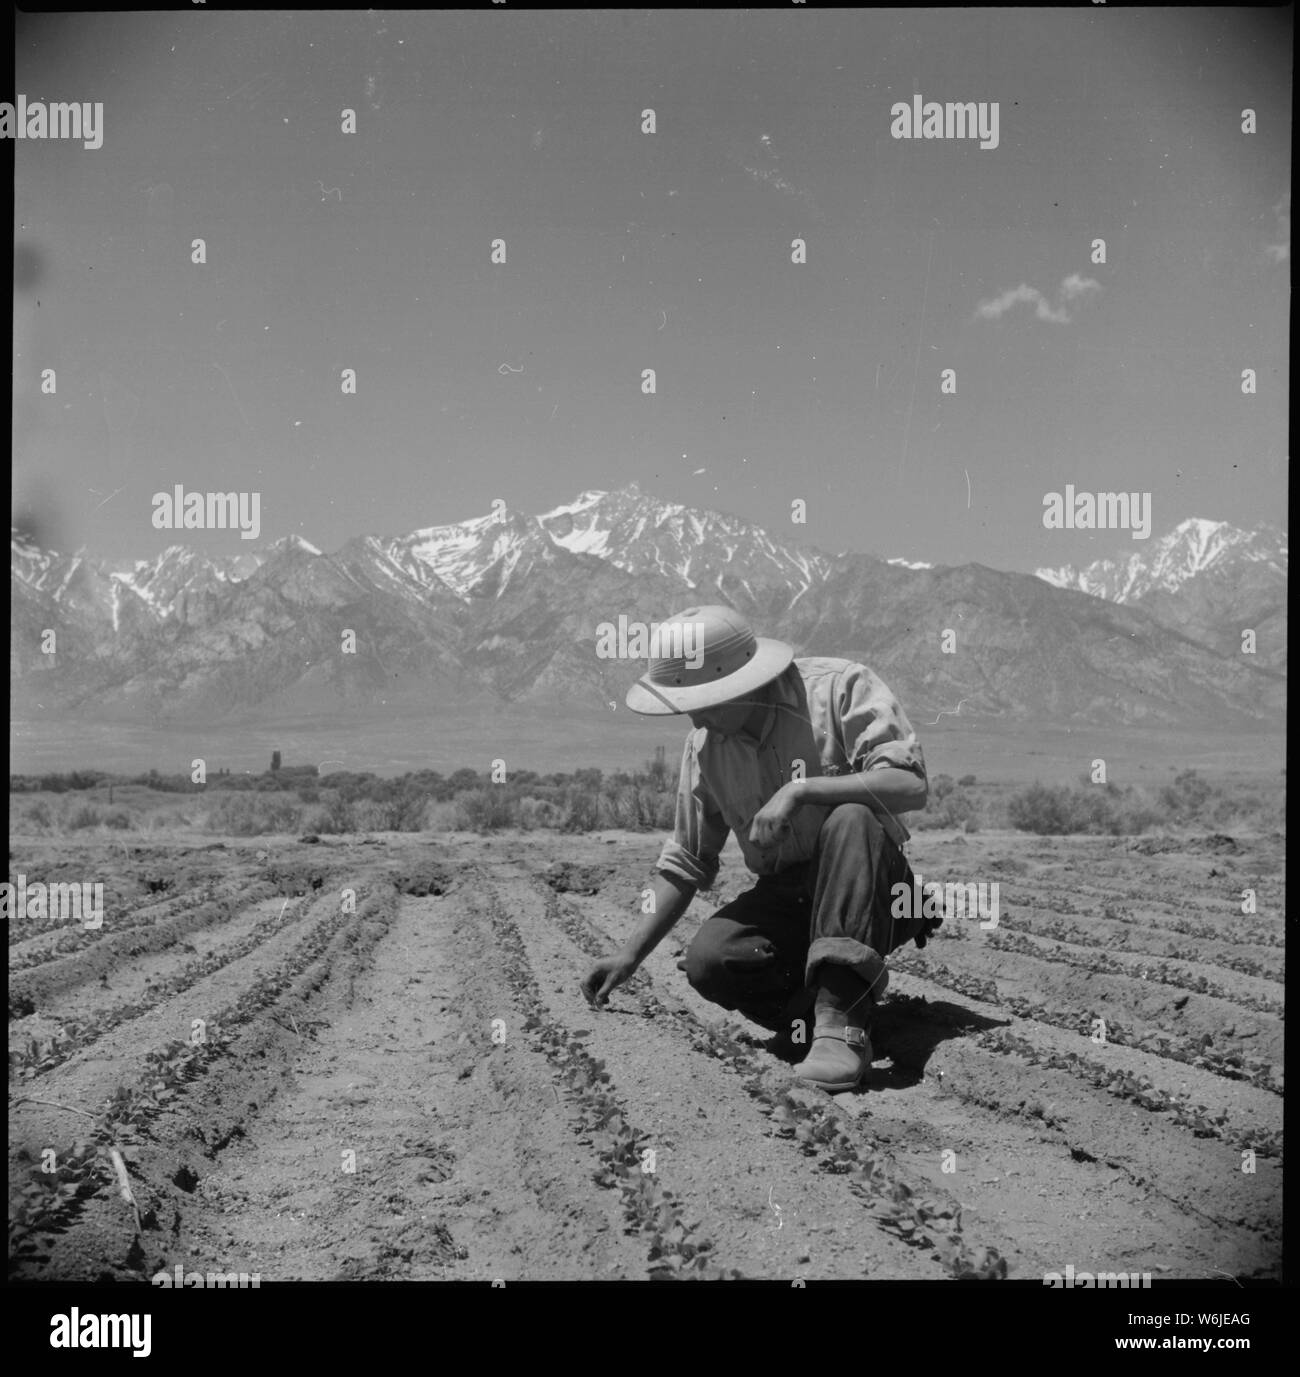 Manzanar Relocation Center, Manzanar, California. Ben Iguchi, 20, from Saugus, California, thins yo . . .; Scope and content:  The full caption for this photograph reads: Manzanar Relocation Center, Manzanar, California. Ben Iguchi, 20, from Saugus, California, thins young plants in two-acre field of white radishes at the relocation center. Snow covered Mount Whitney, highest peak in the United States, is shown in the background. Stock Photo